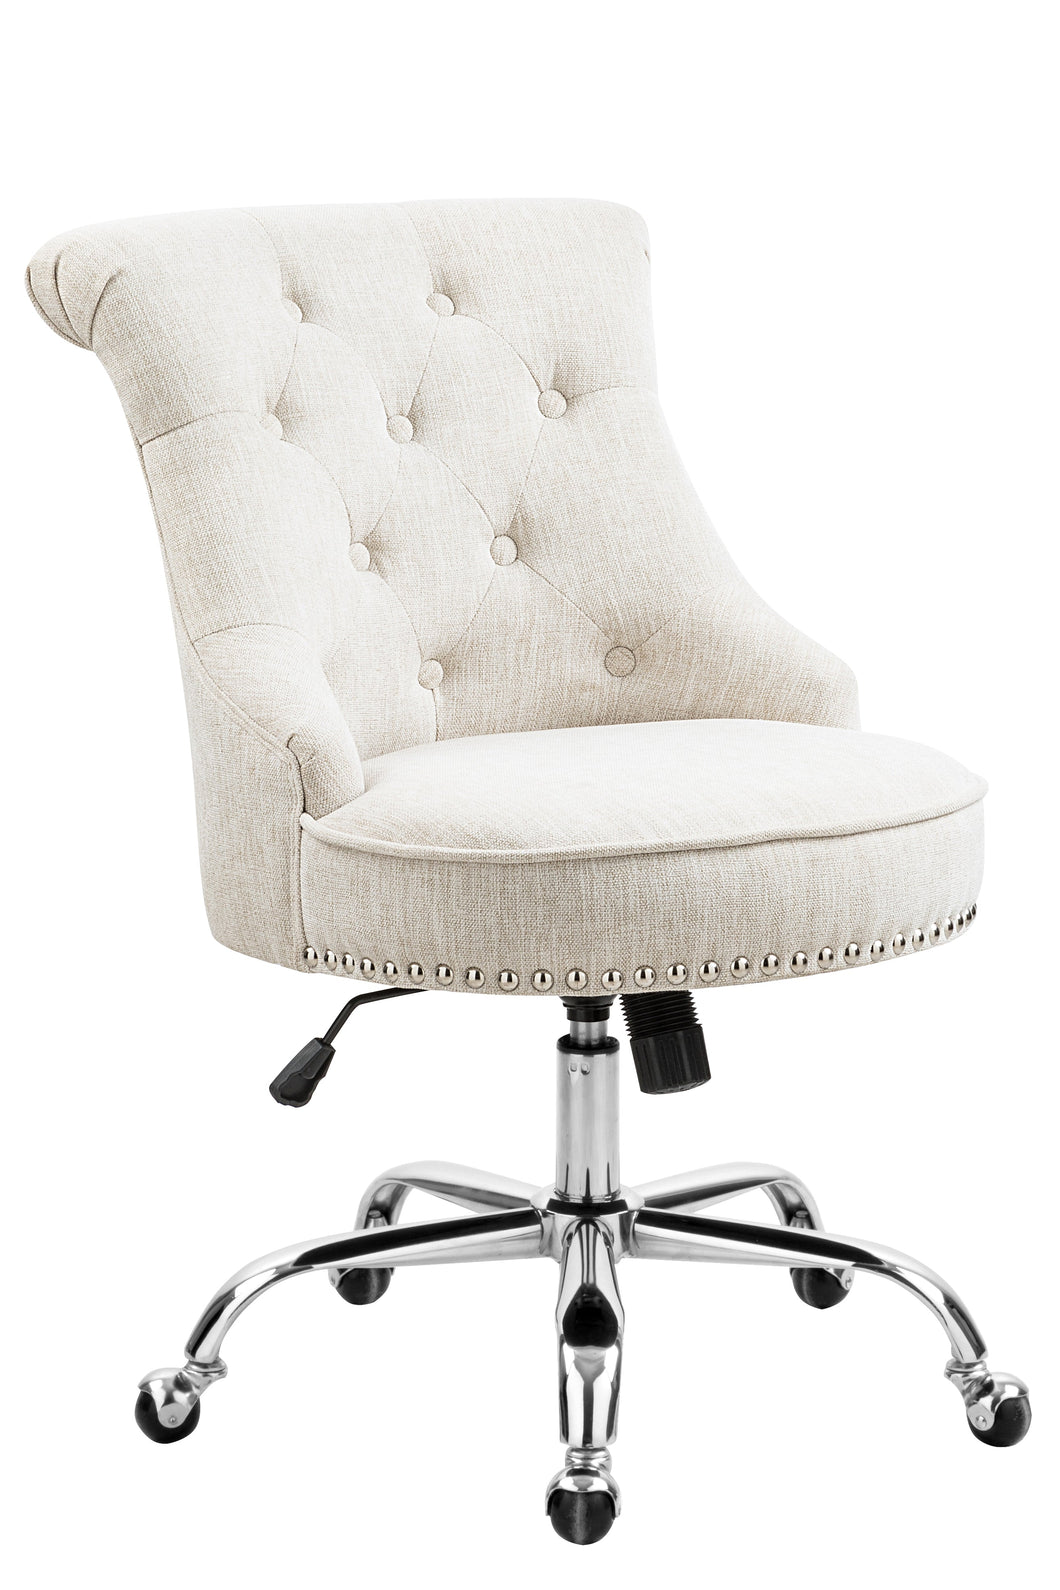 BOWDEN Classic Looking Office Chair - HomyCasa